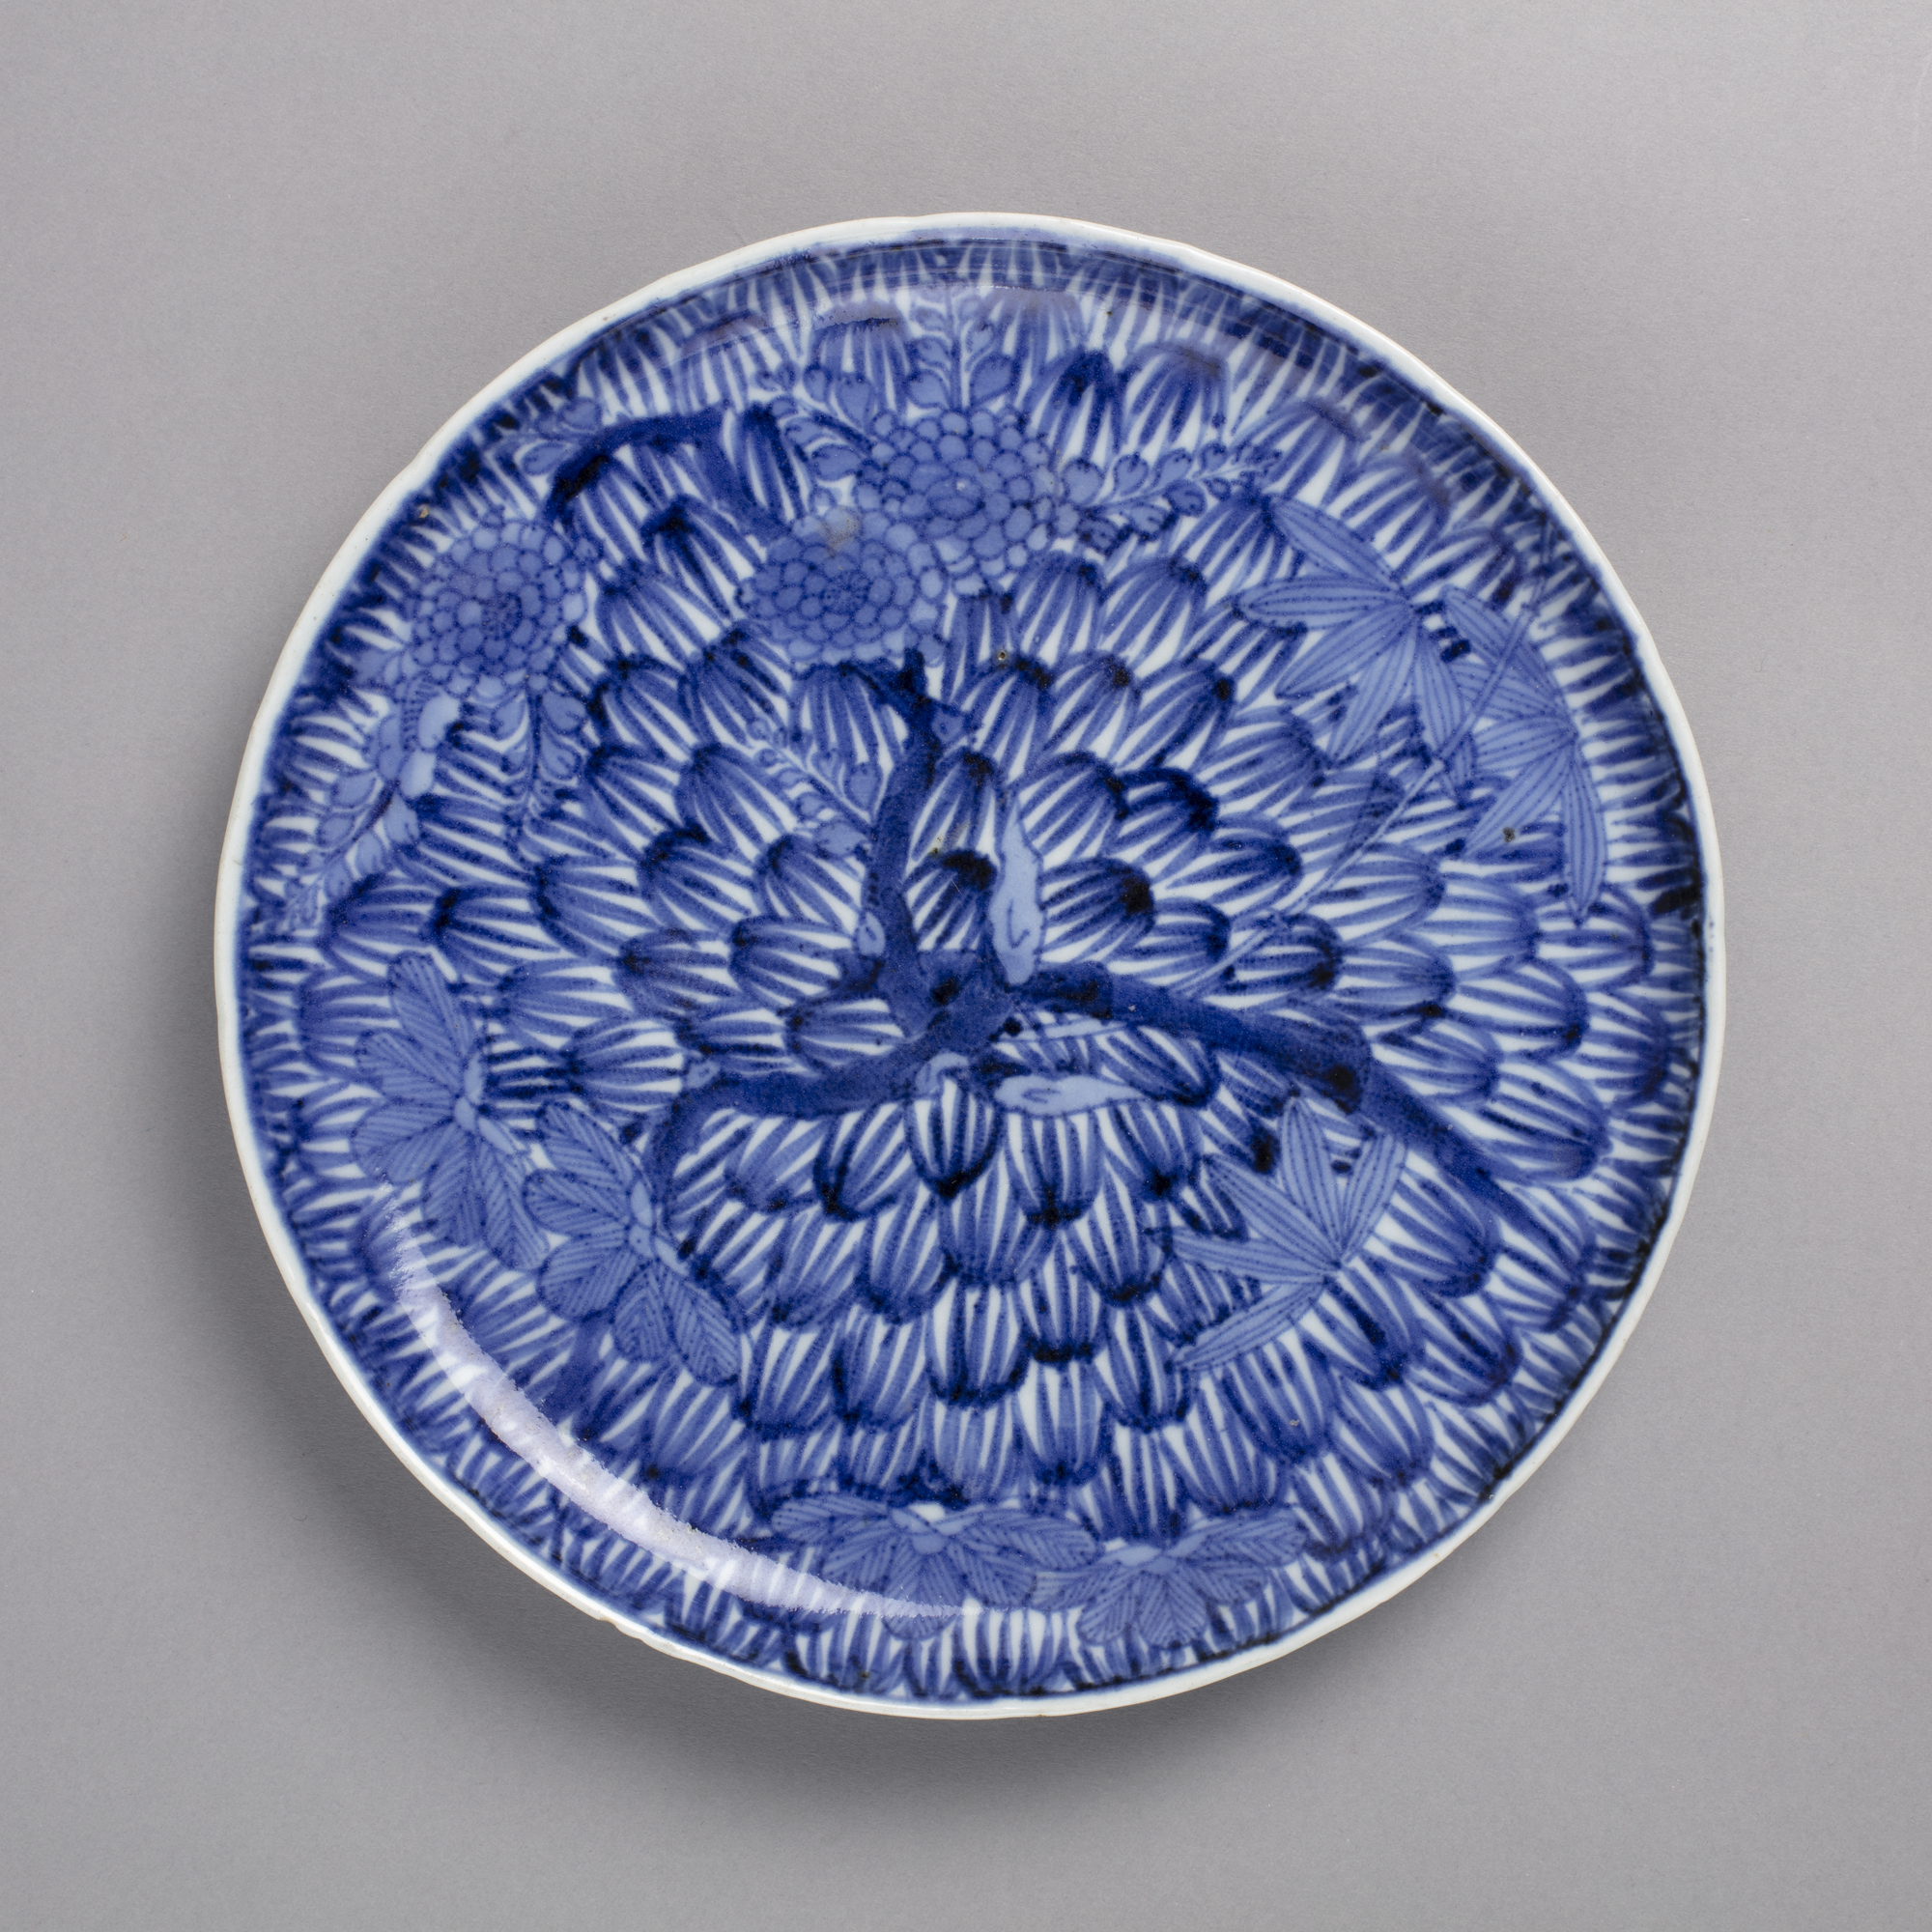 Dish with blue on white design of pine, bamboo, and plum